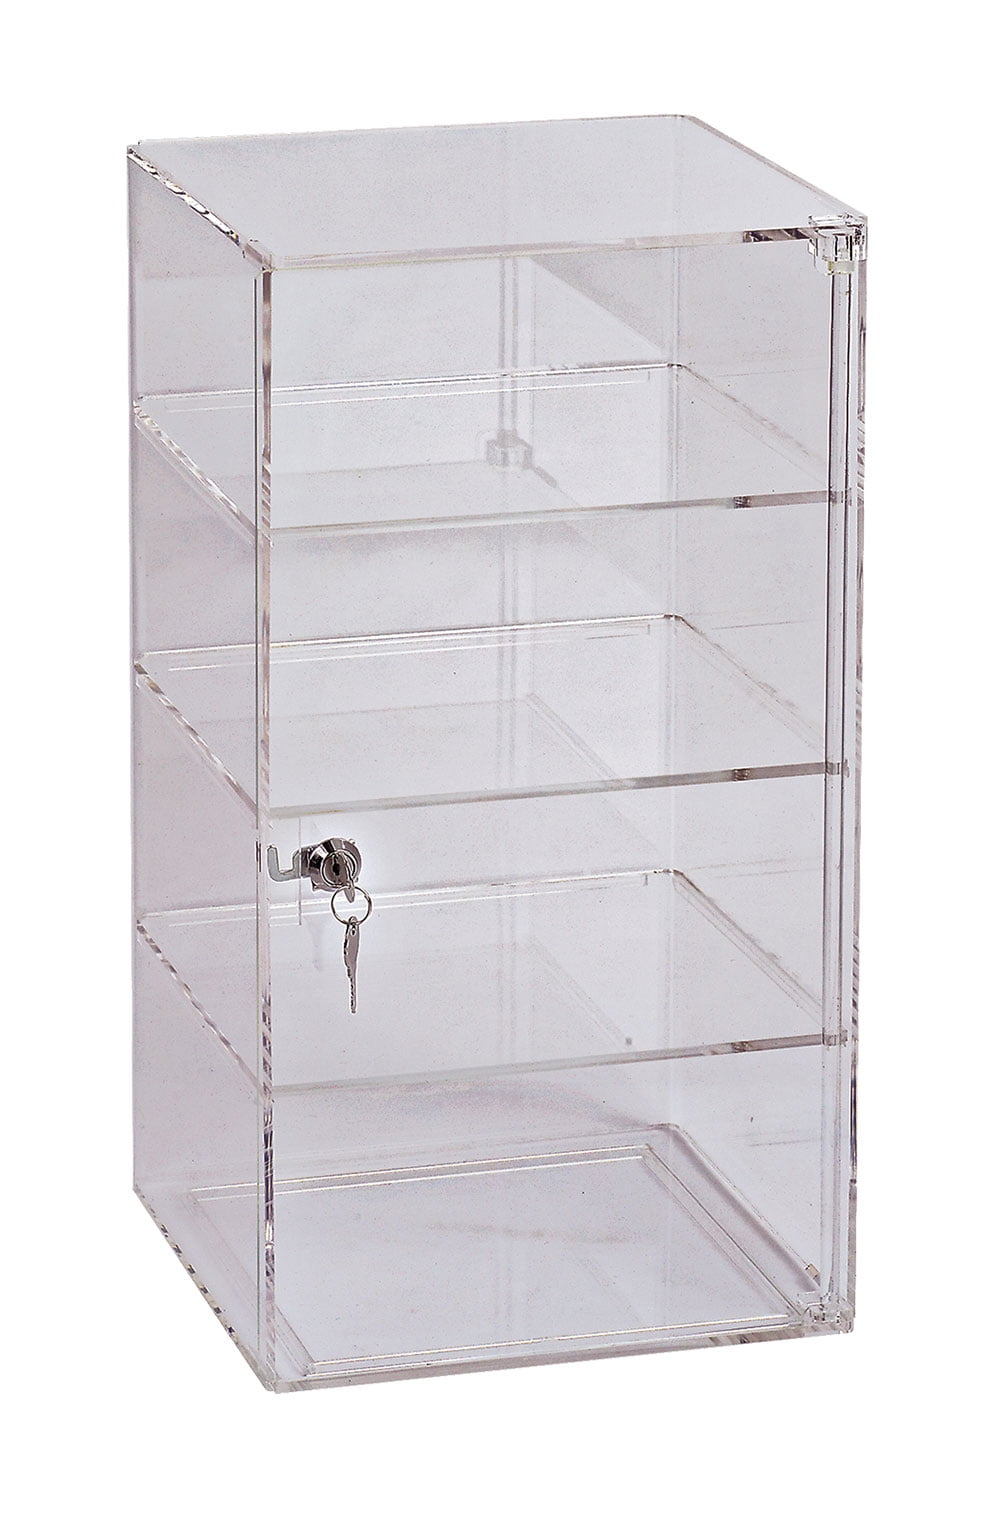 New Retails 4 tier Clear Locking Acrylic countertop display case 